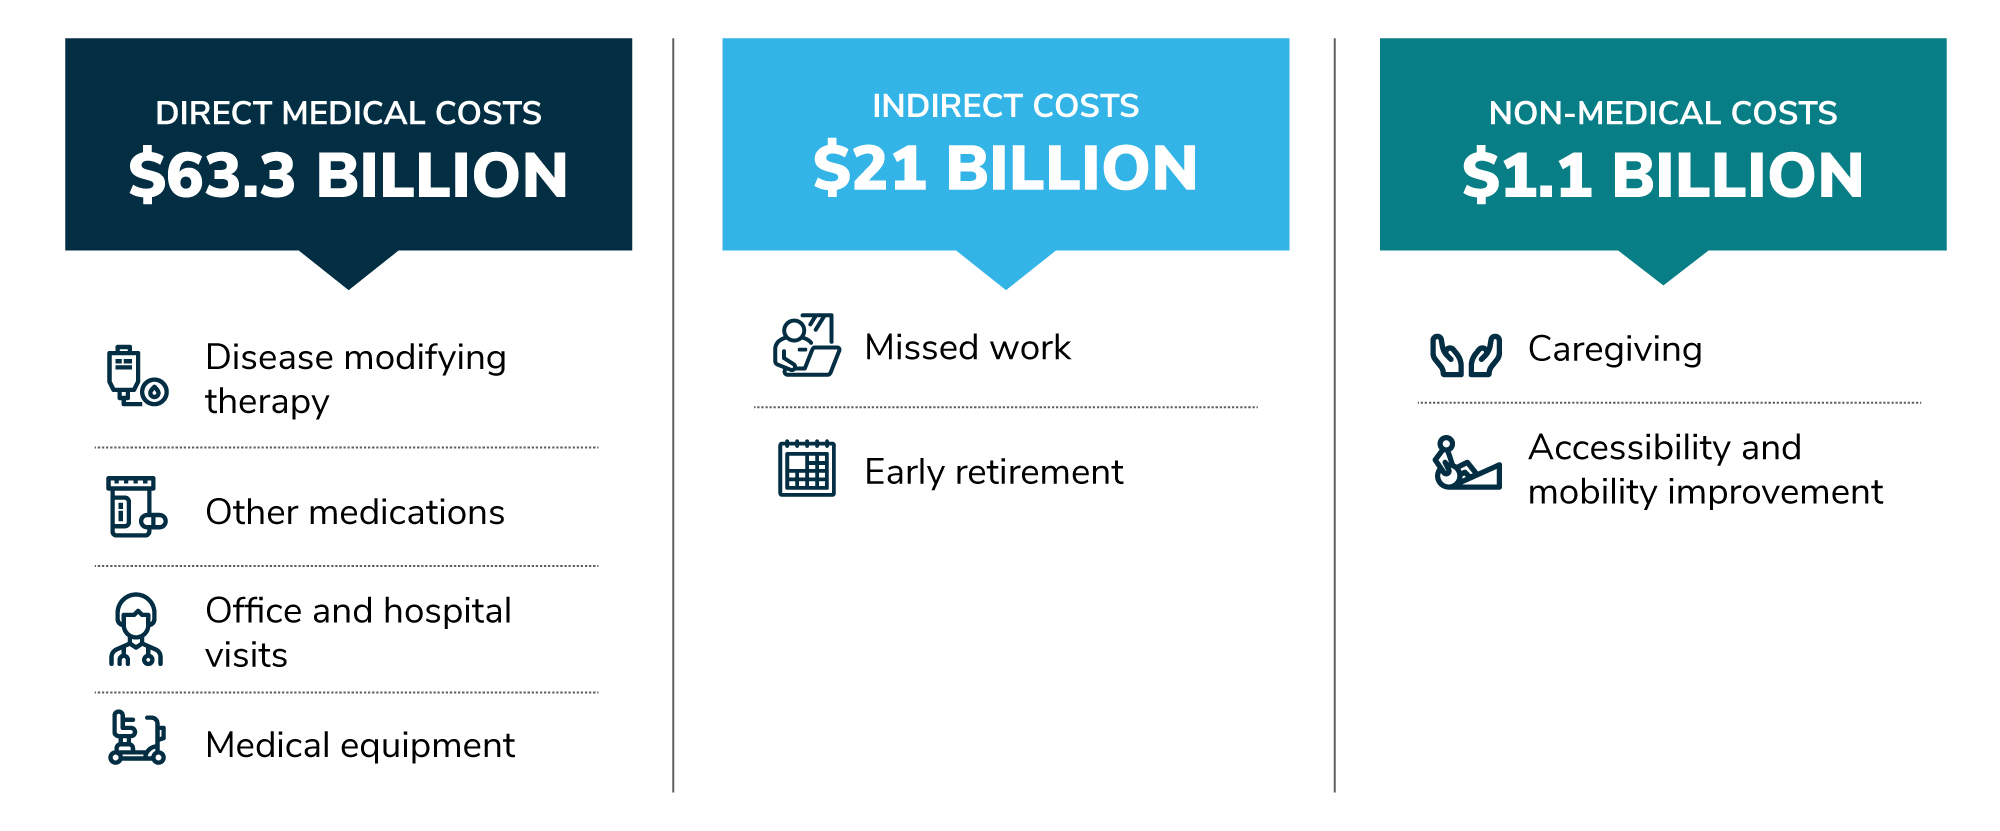 Direct medical costs, indirect medical costs, and non-medical costs total $85.4 billion